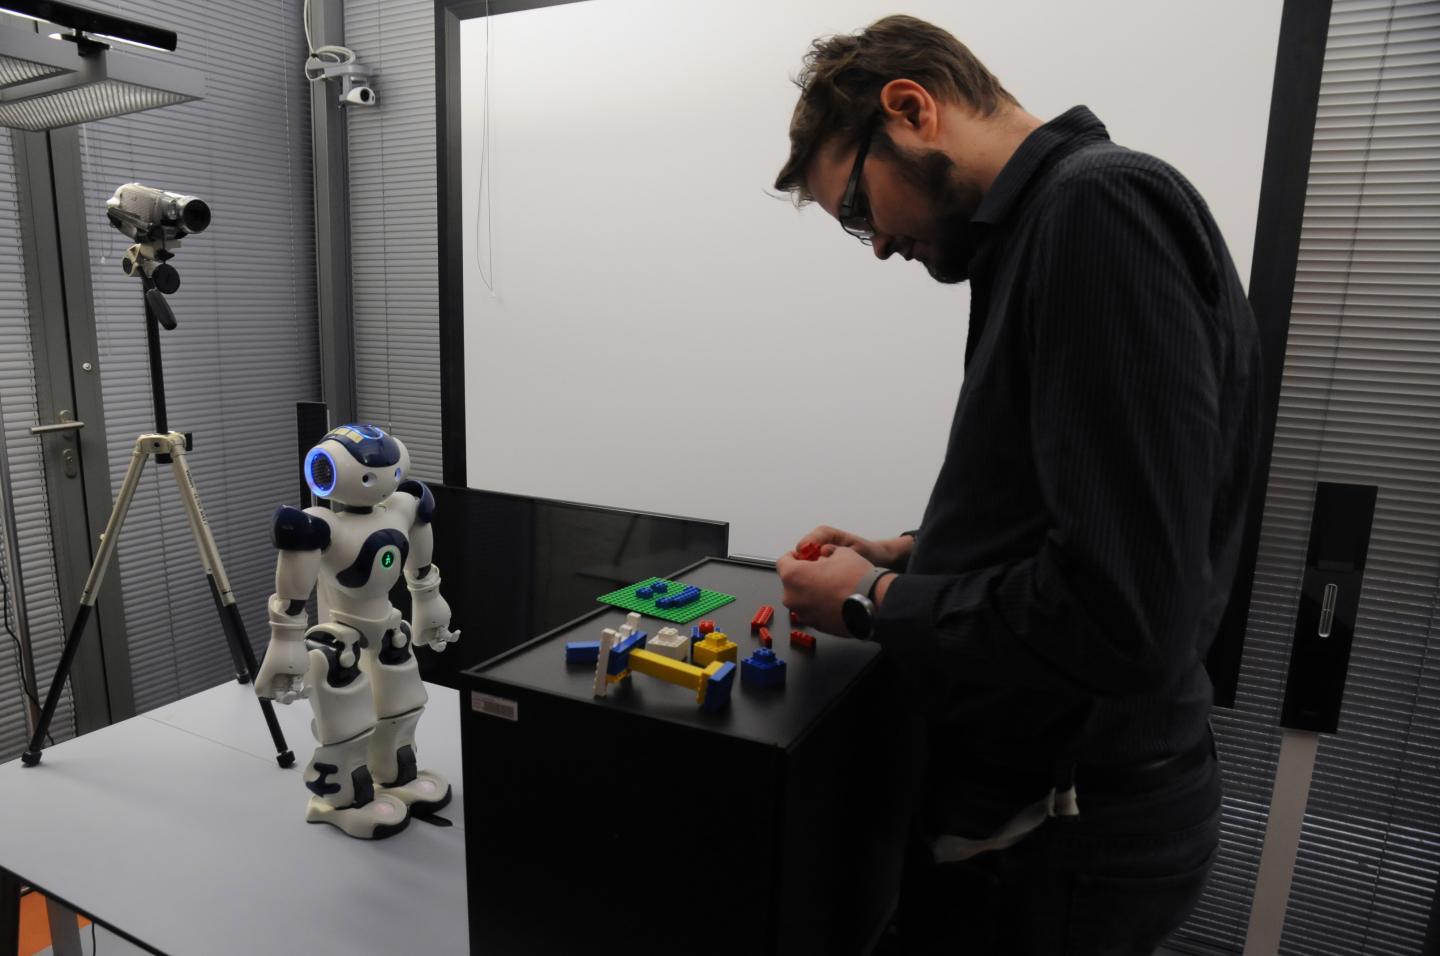 Robots That Make Mistakes are More Likeable